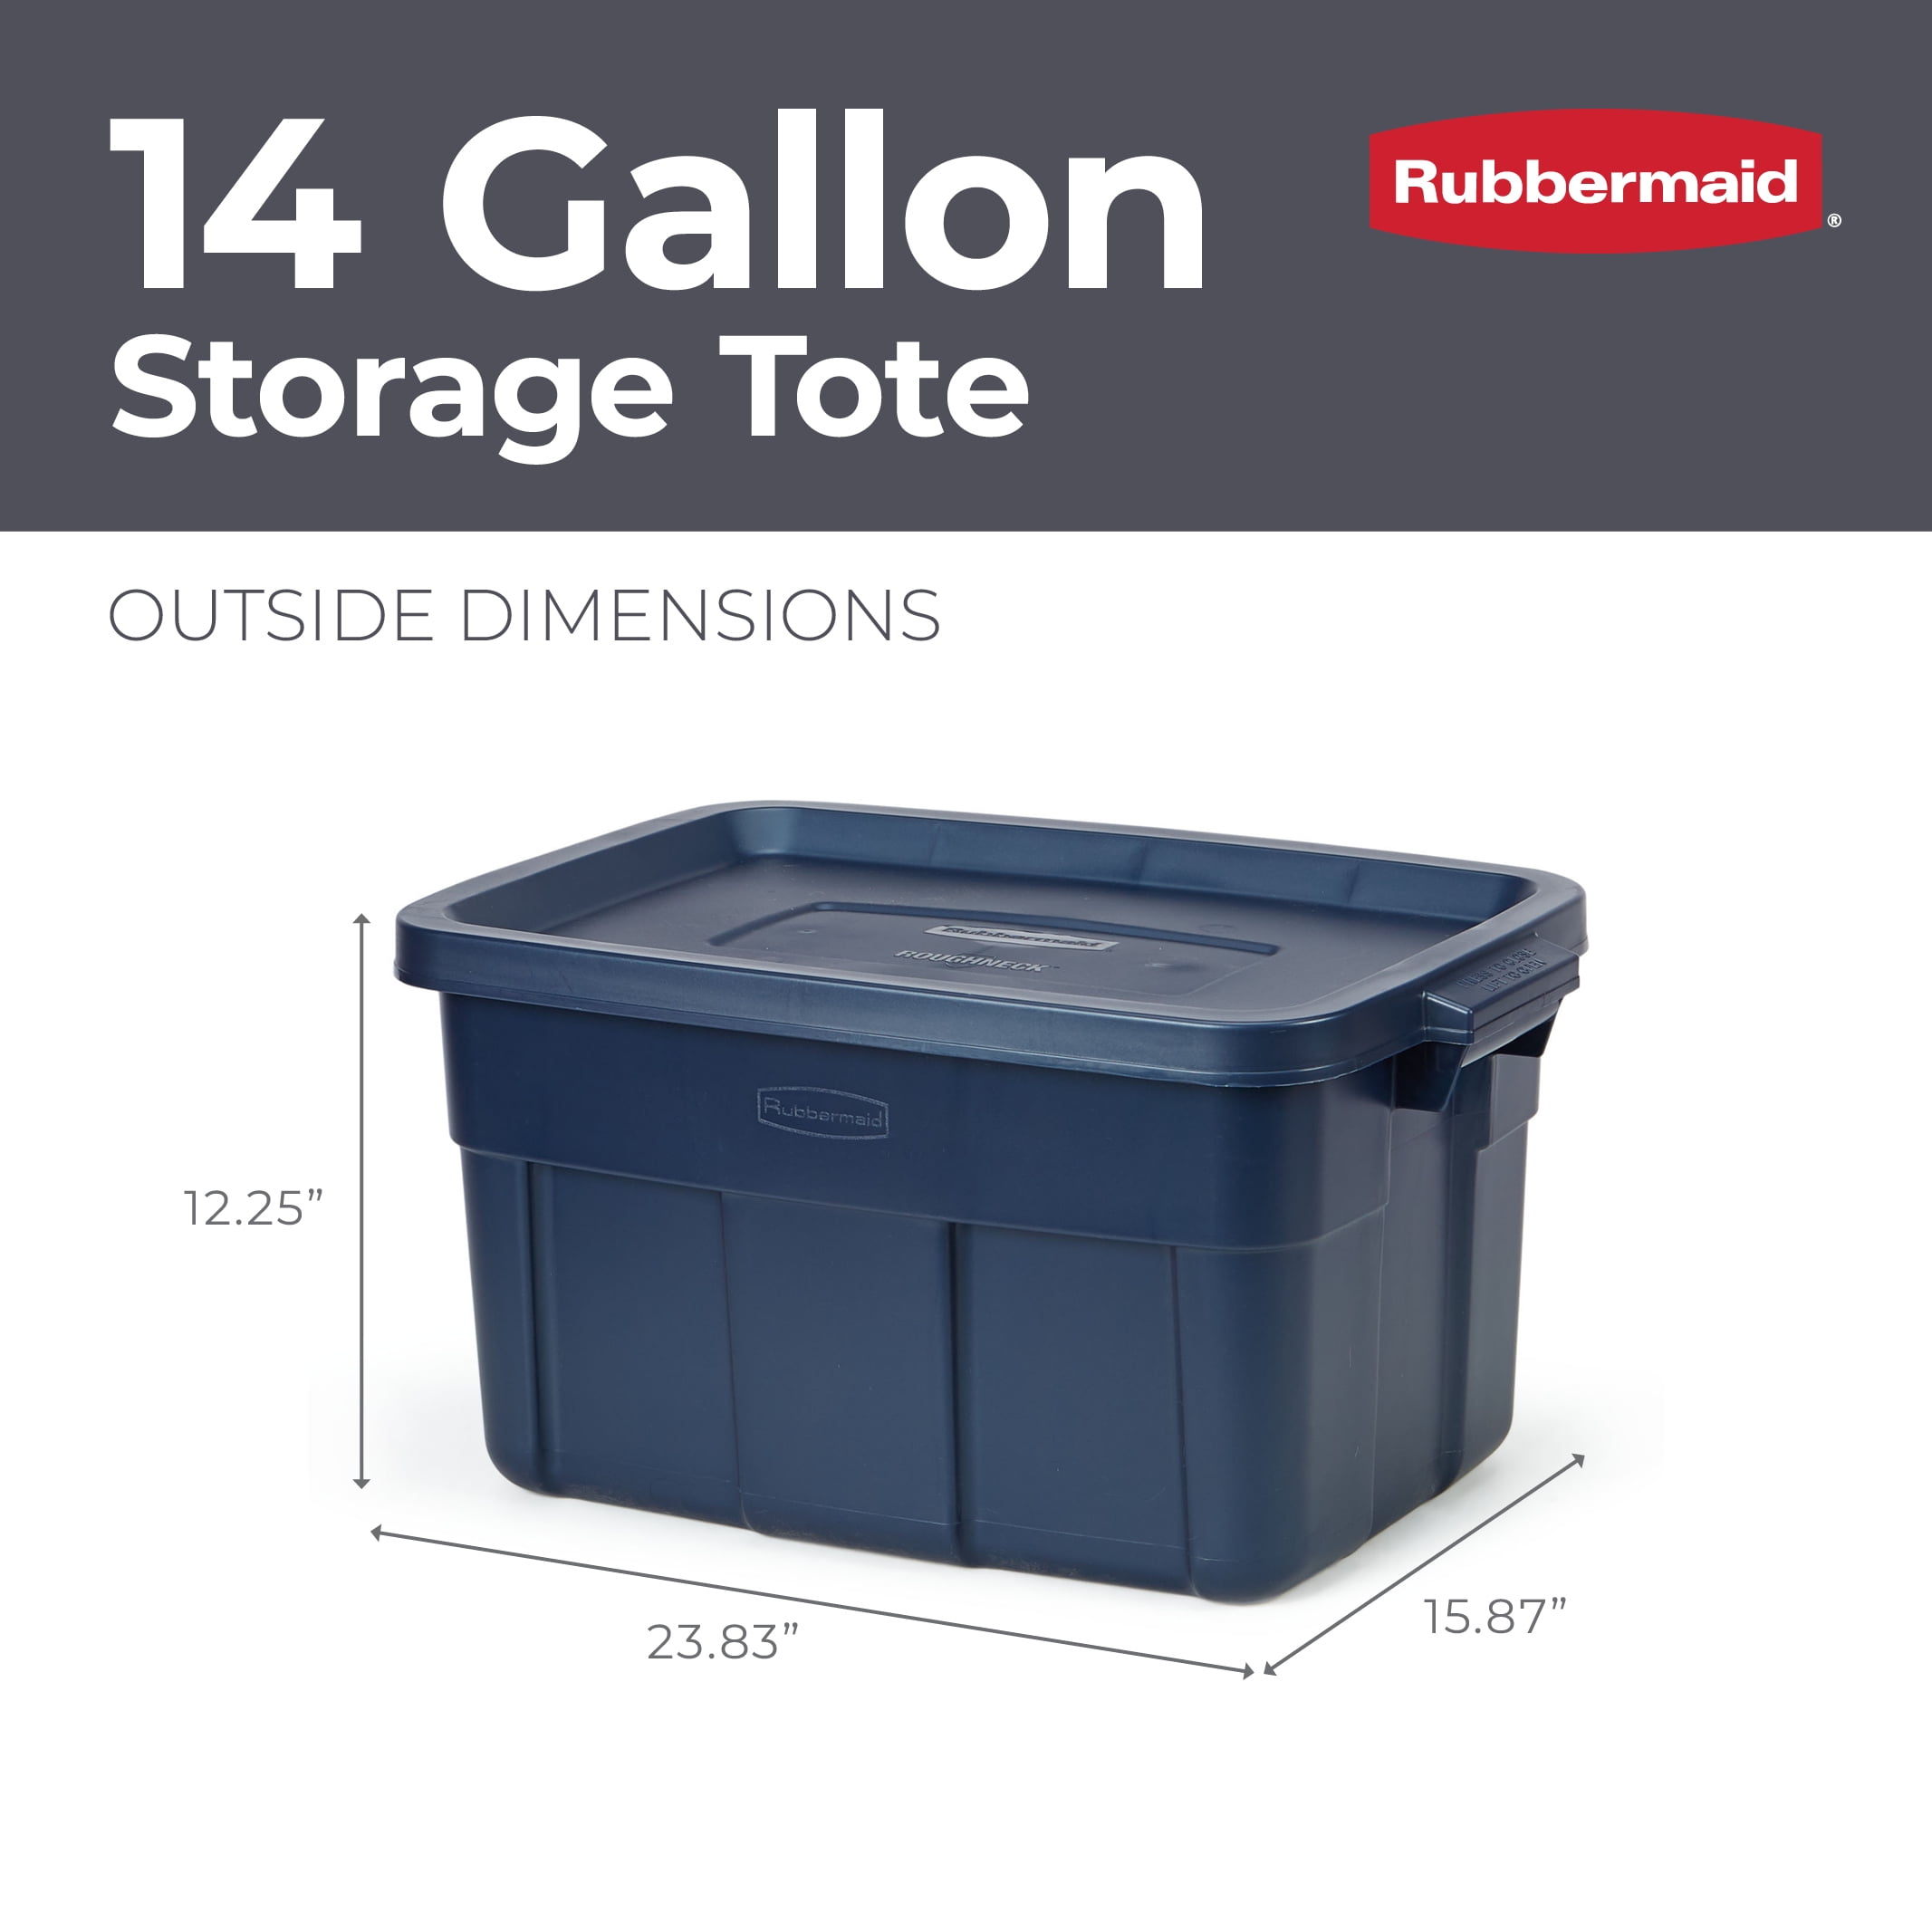 Rubbermaid Roughneck Storage Tote, 14 Gallon - Midwest Technology